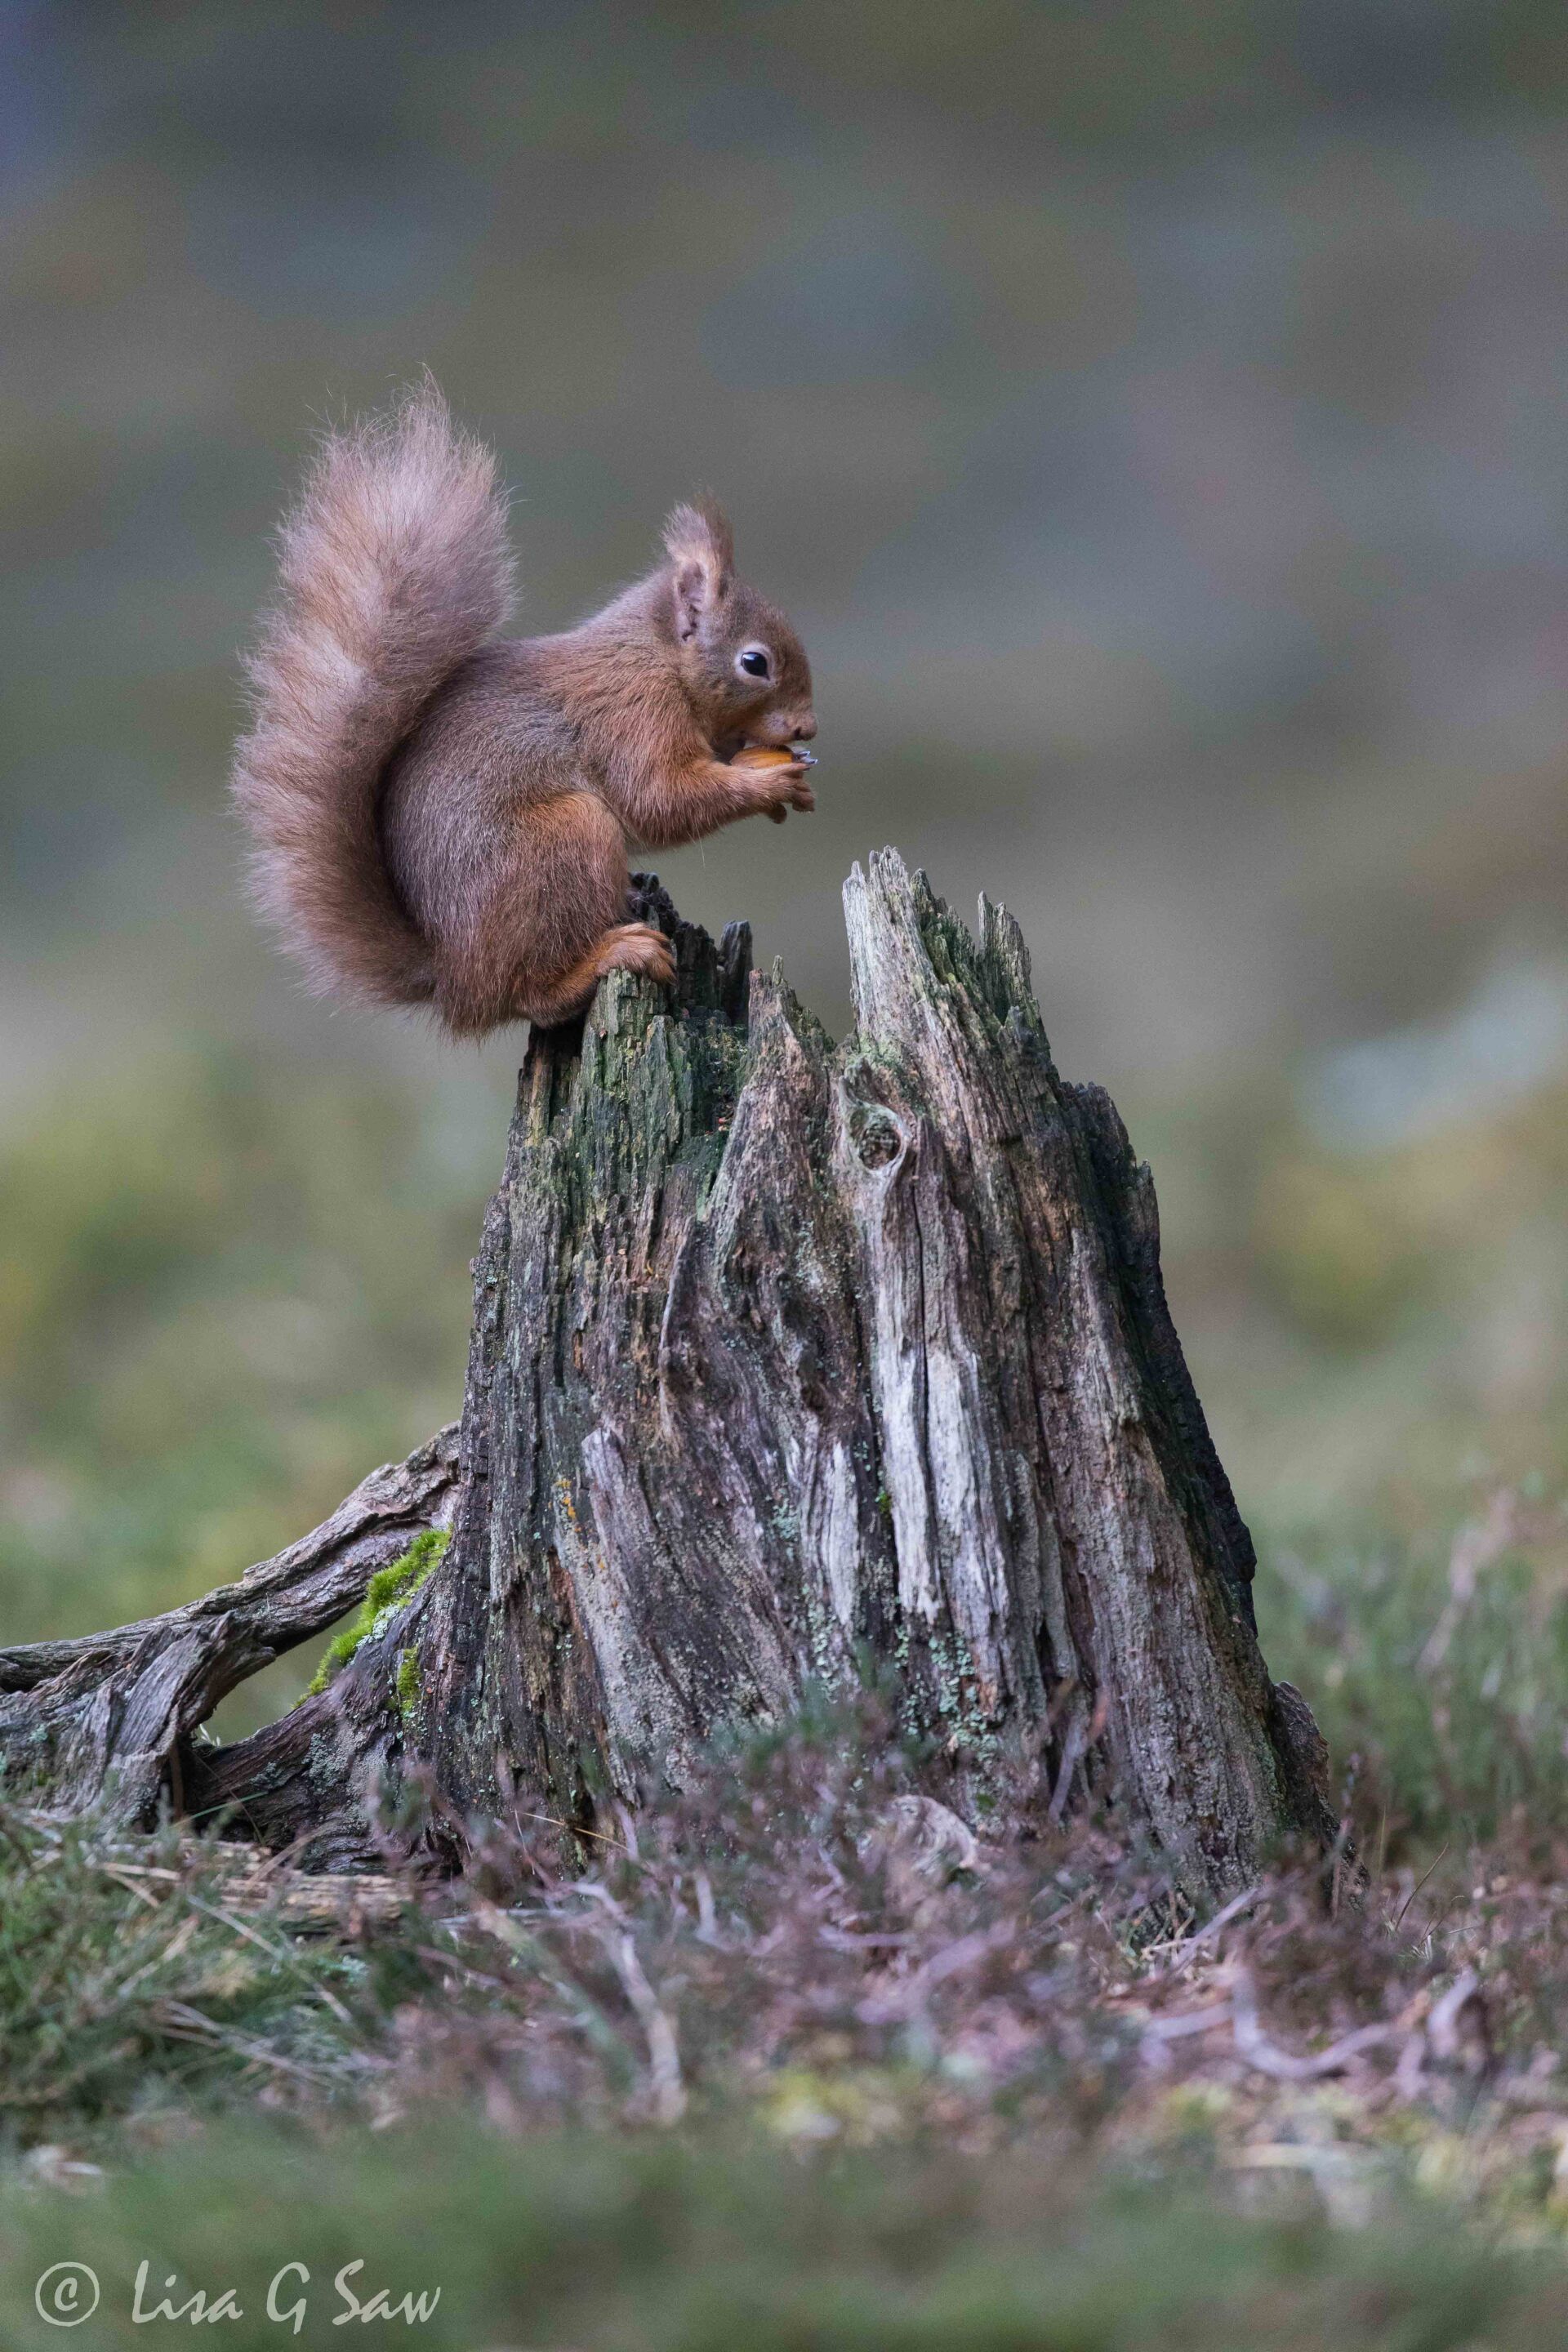 Red Squirrel on a tree stump eating nut